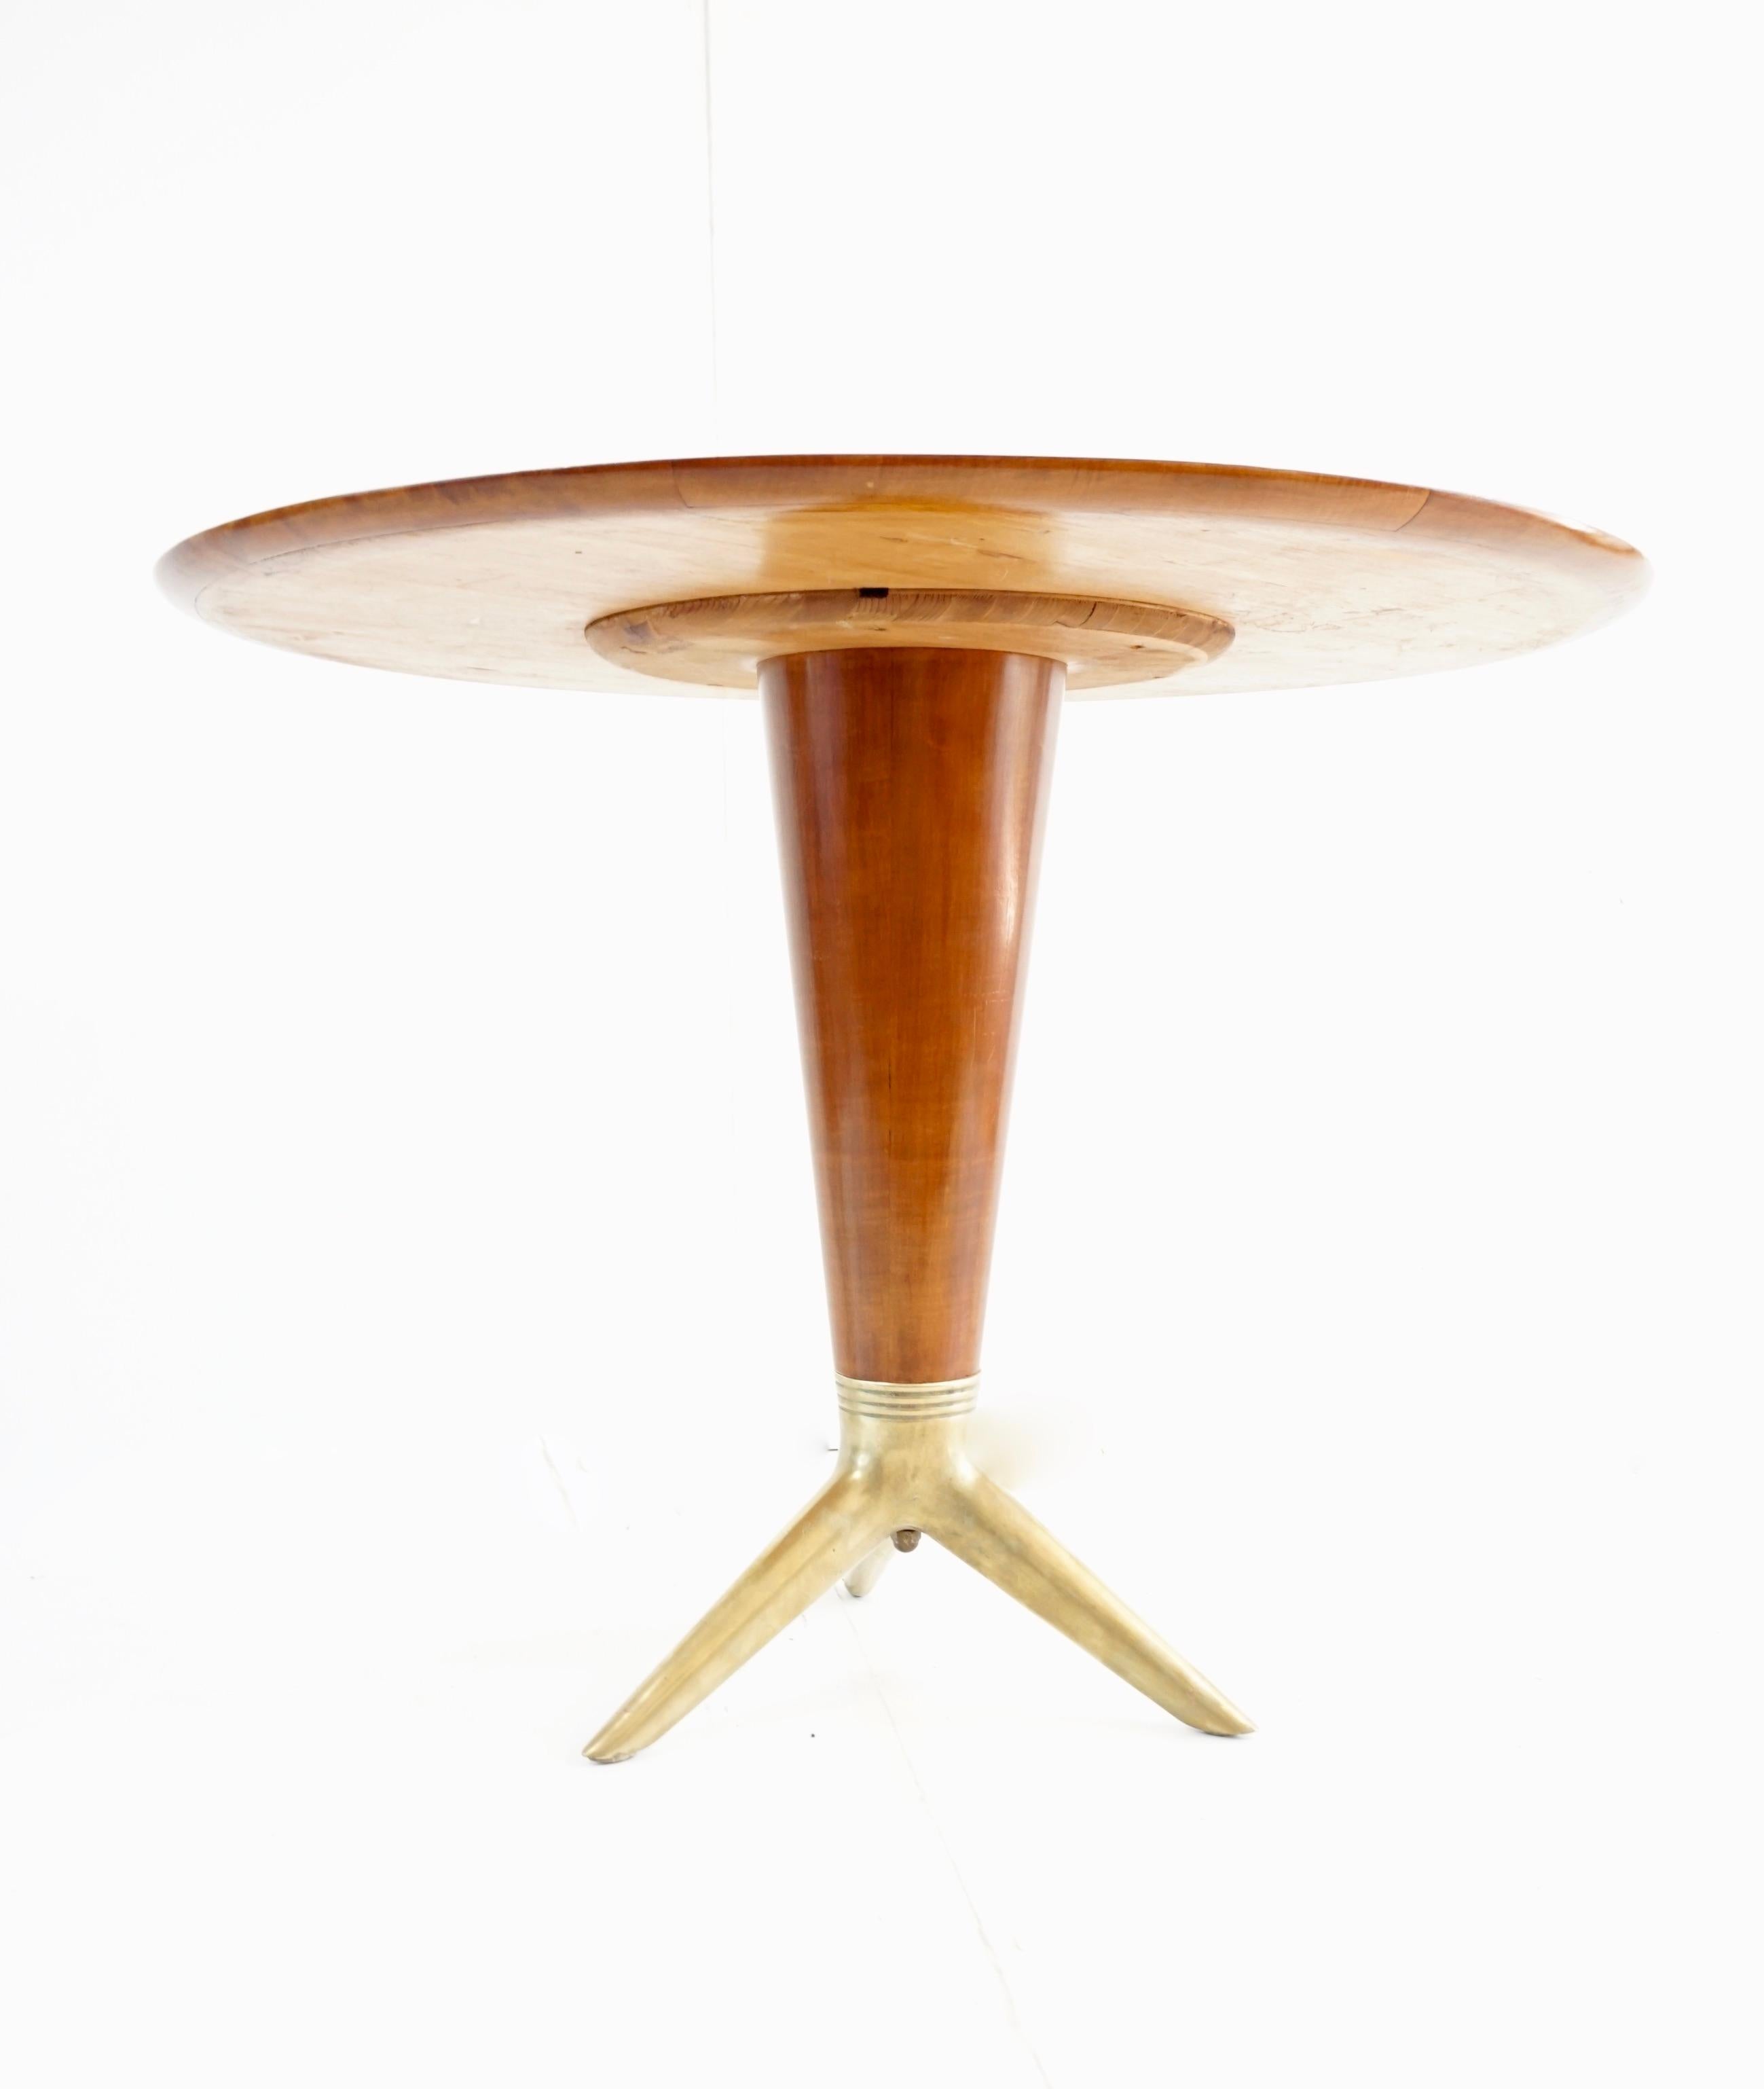 Rare Maple and Brass Round Center Table by I.S.A. Bergamo 1950 For Sale 3